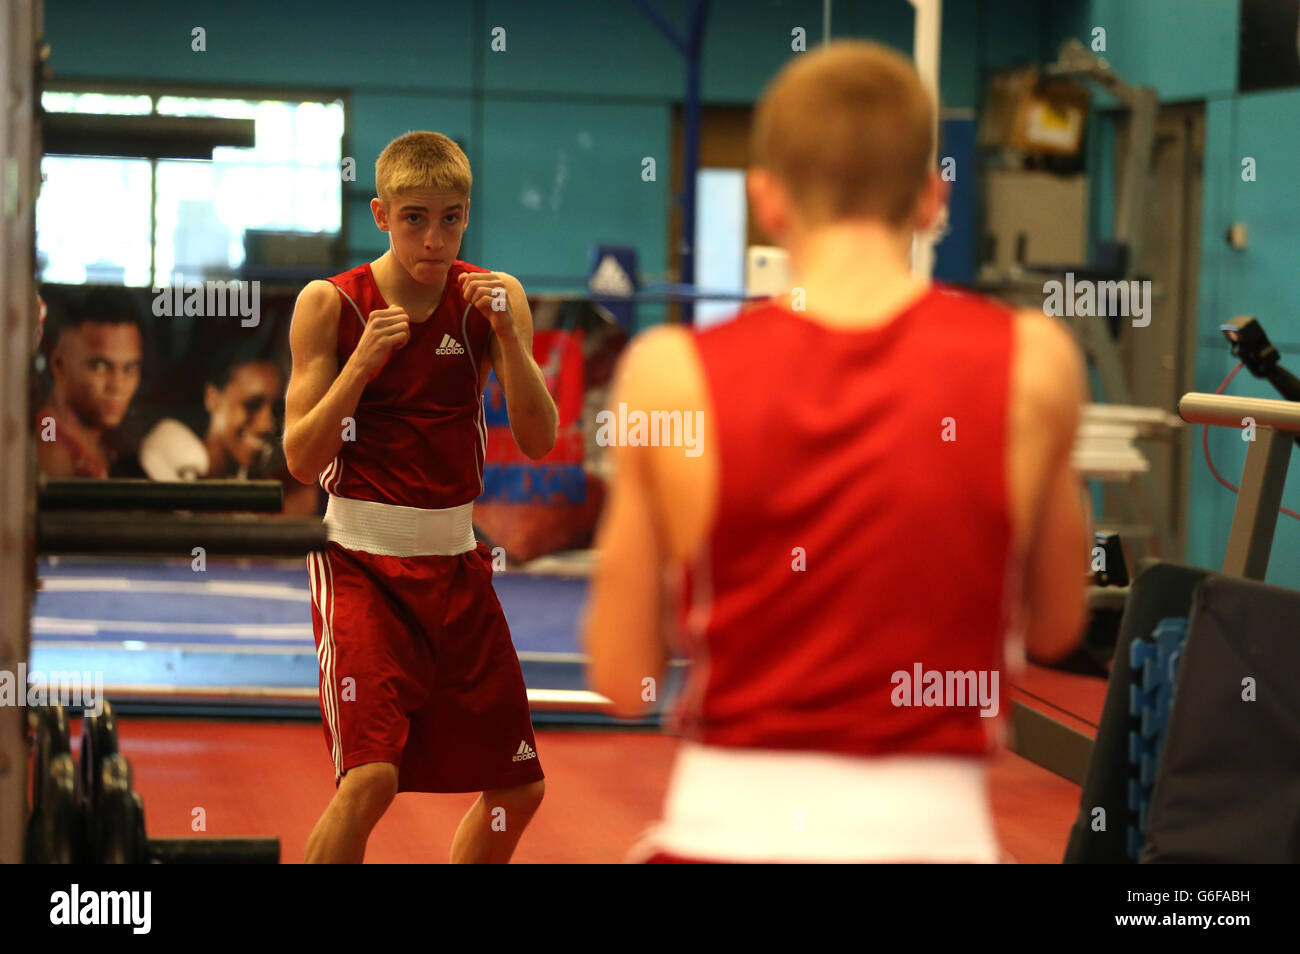 Boxing - Team GB Media Day - English Institute of Sport. Jack Bateson during the Team GB Media Day at the English Institute of Sport, Sheffield. Stock Photo